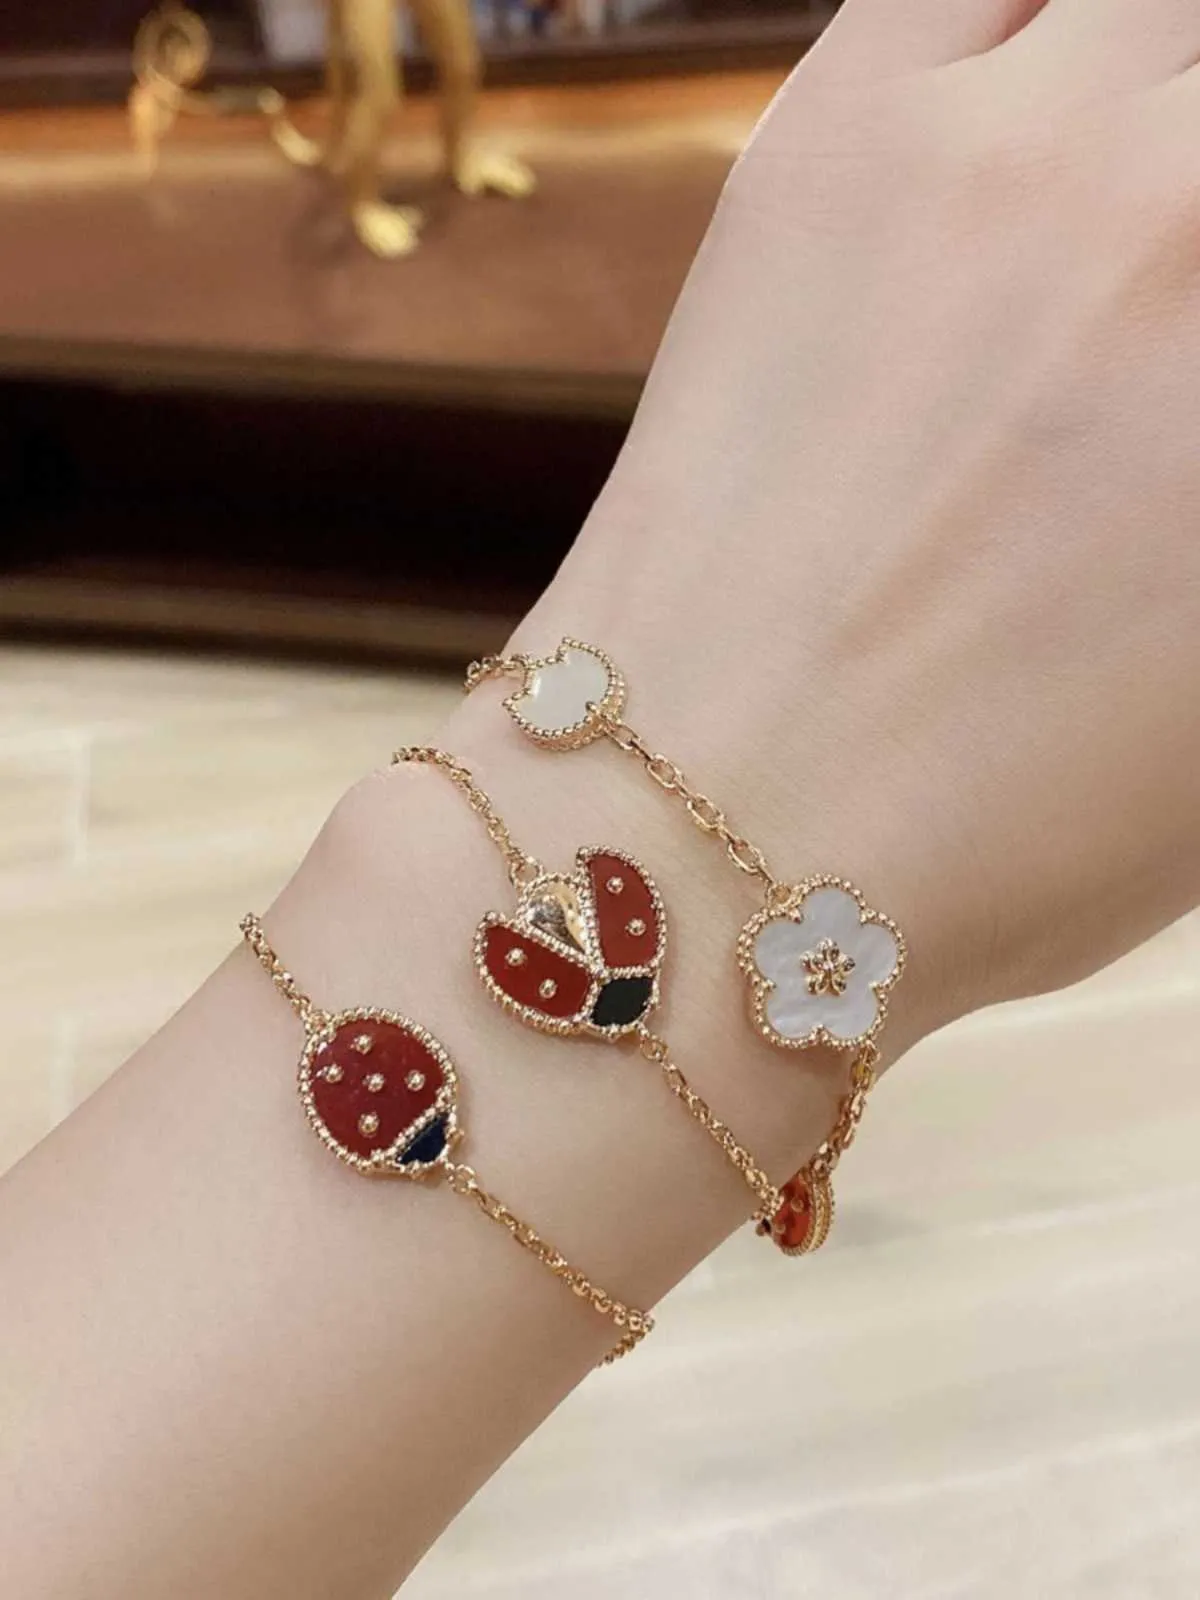 Peoples choice to go essential braceletHigh Gold Seven Star Ladybug Flower Bracelet Female Blossom Bee with common vnain